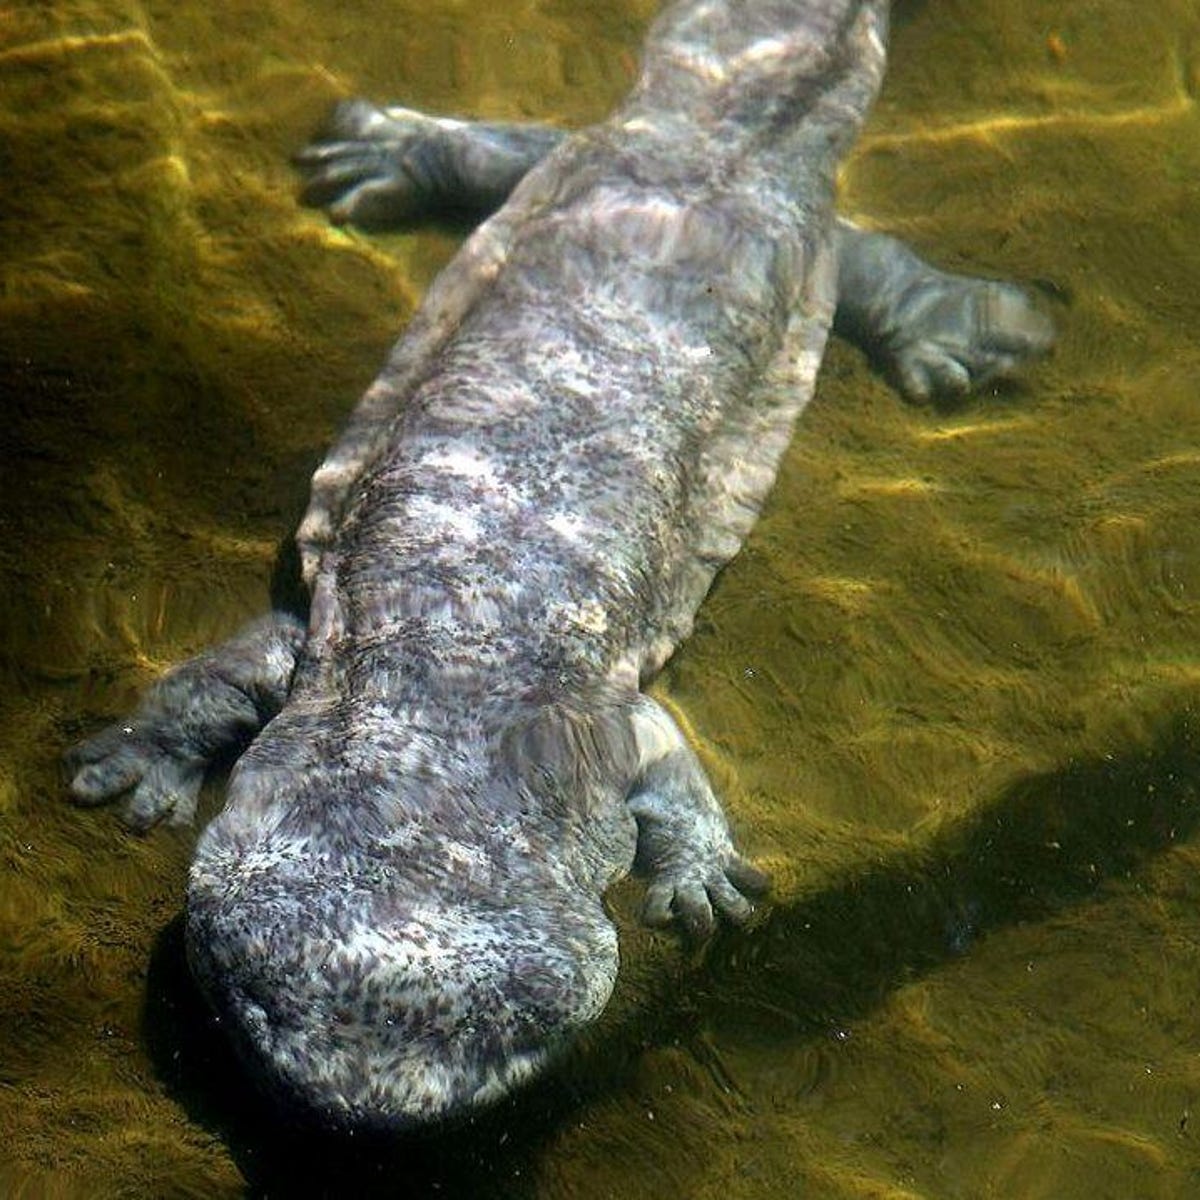 Chinese giant salamanders being eaten into extinction - CNET